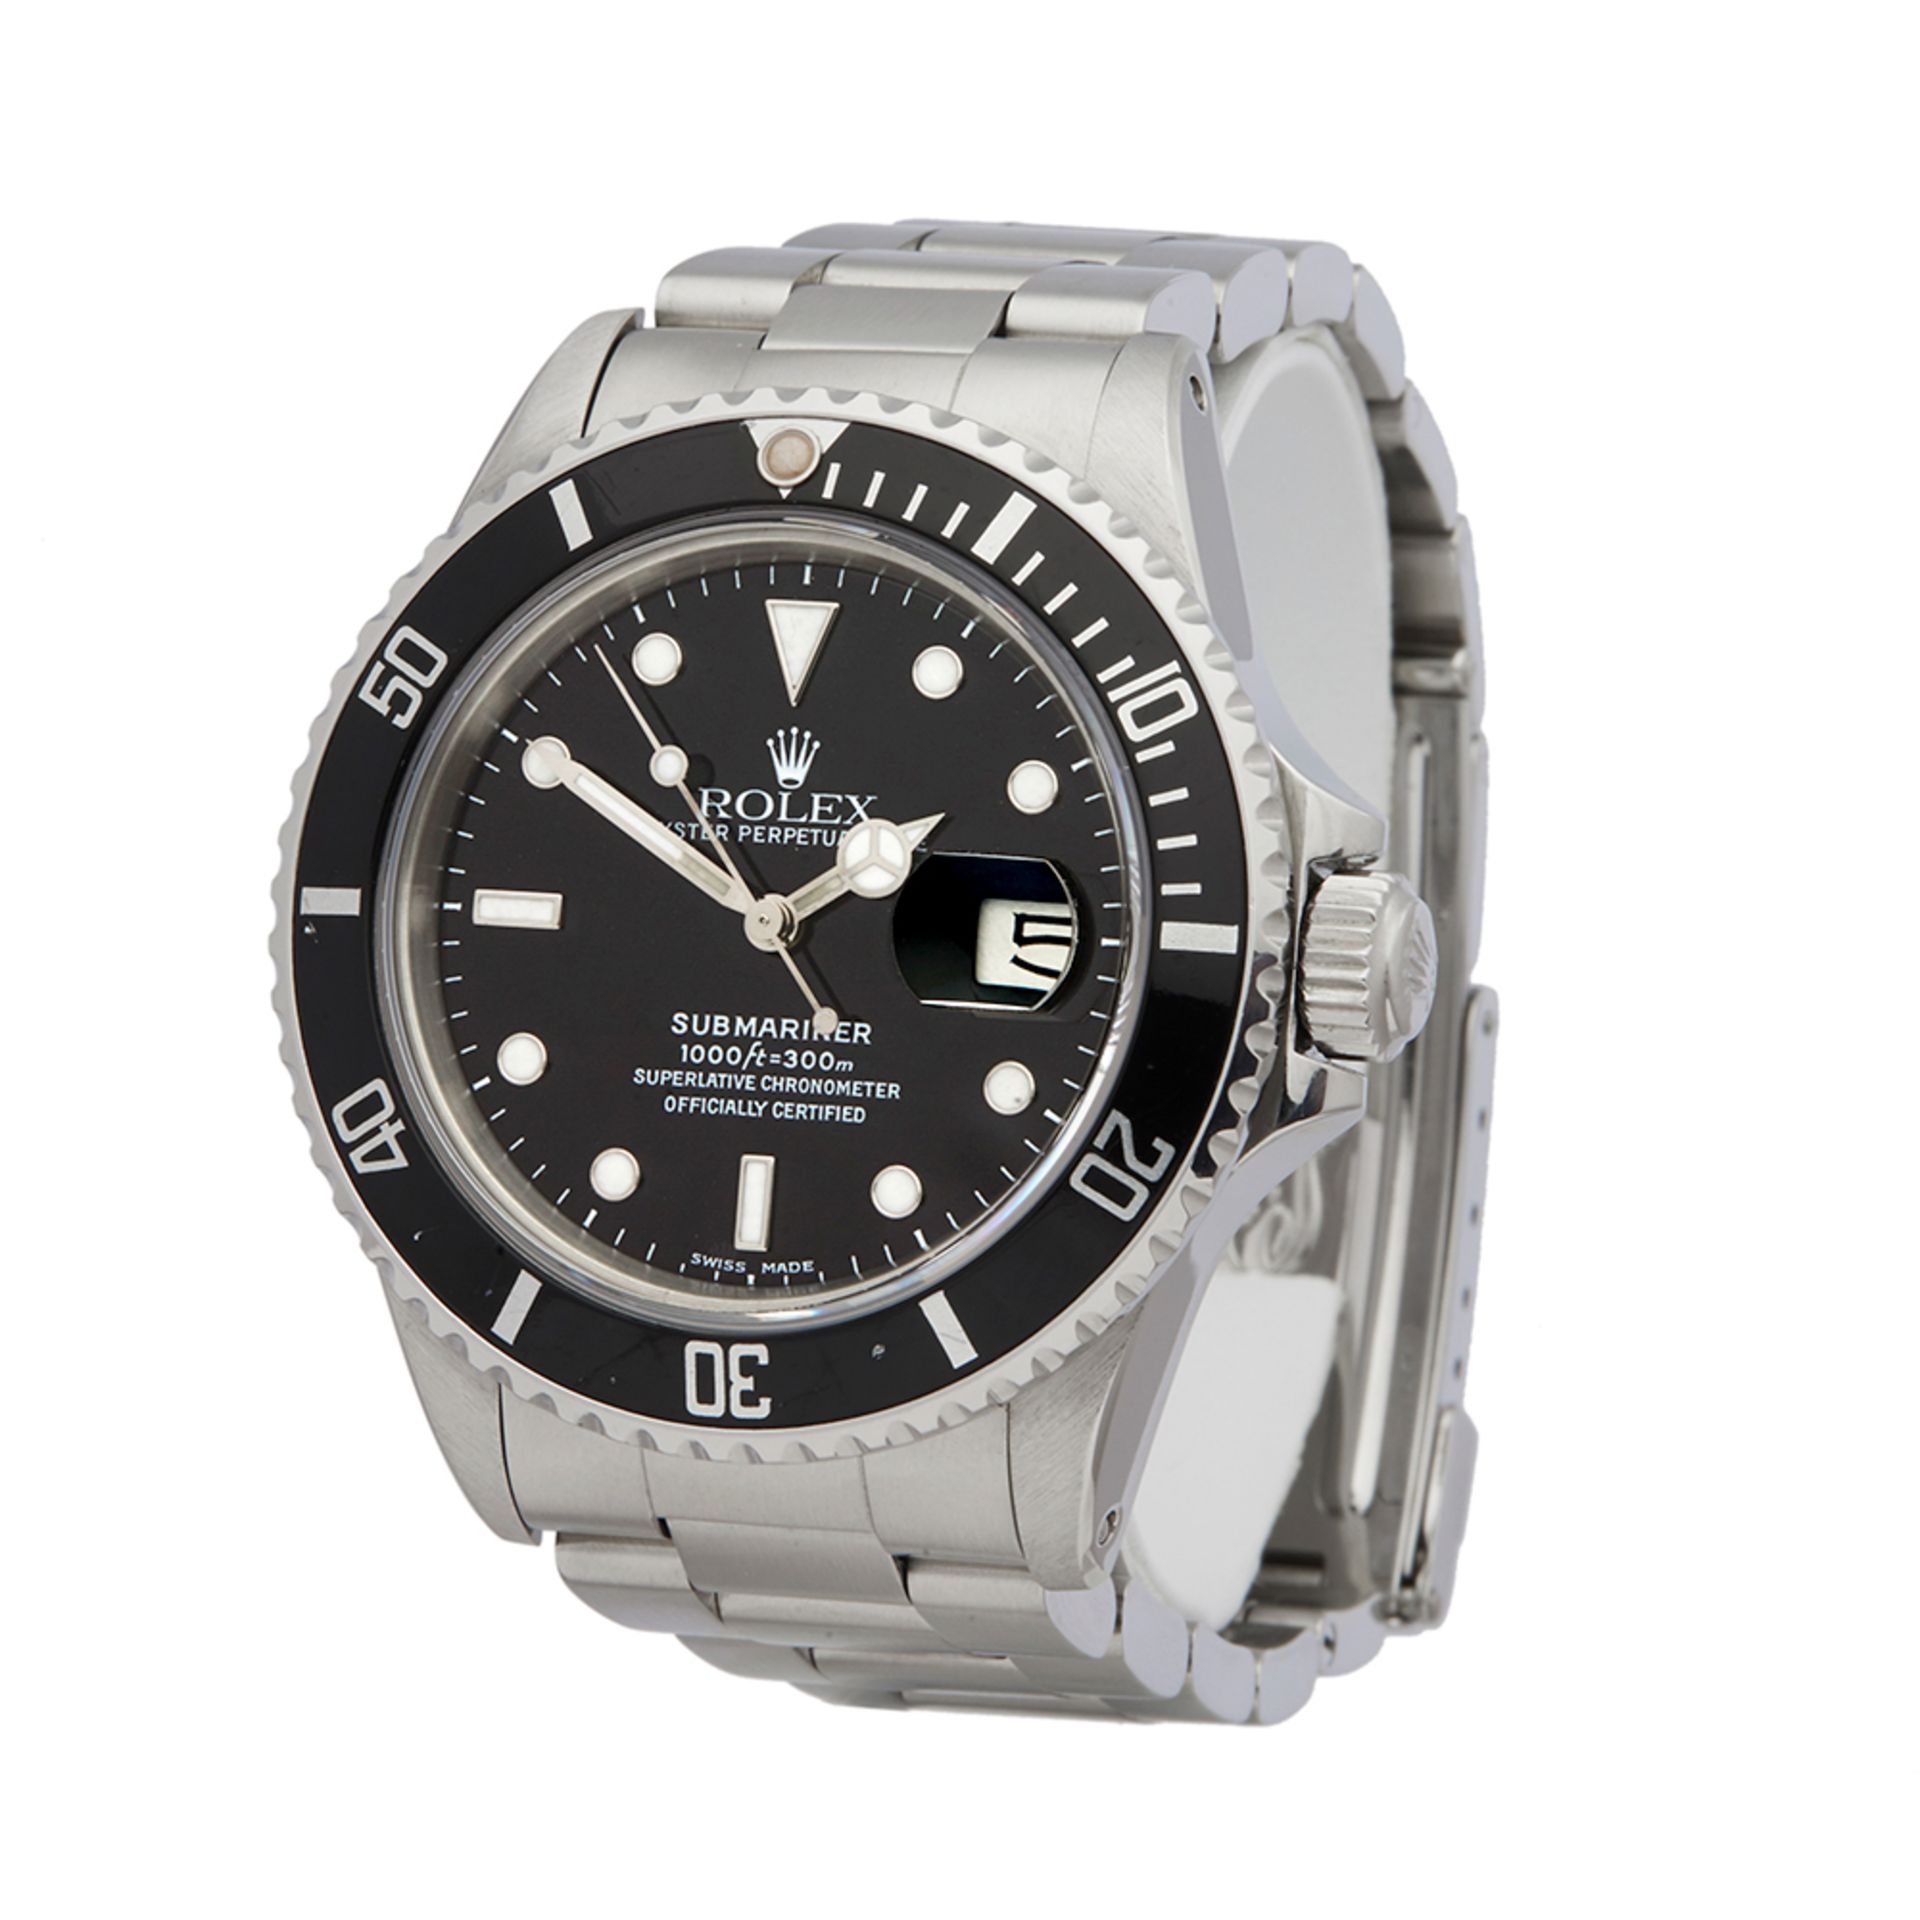 1985 Rolex Submariner Stainless Steel - 16800 - Image 10 of 10